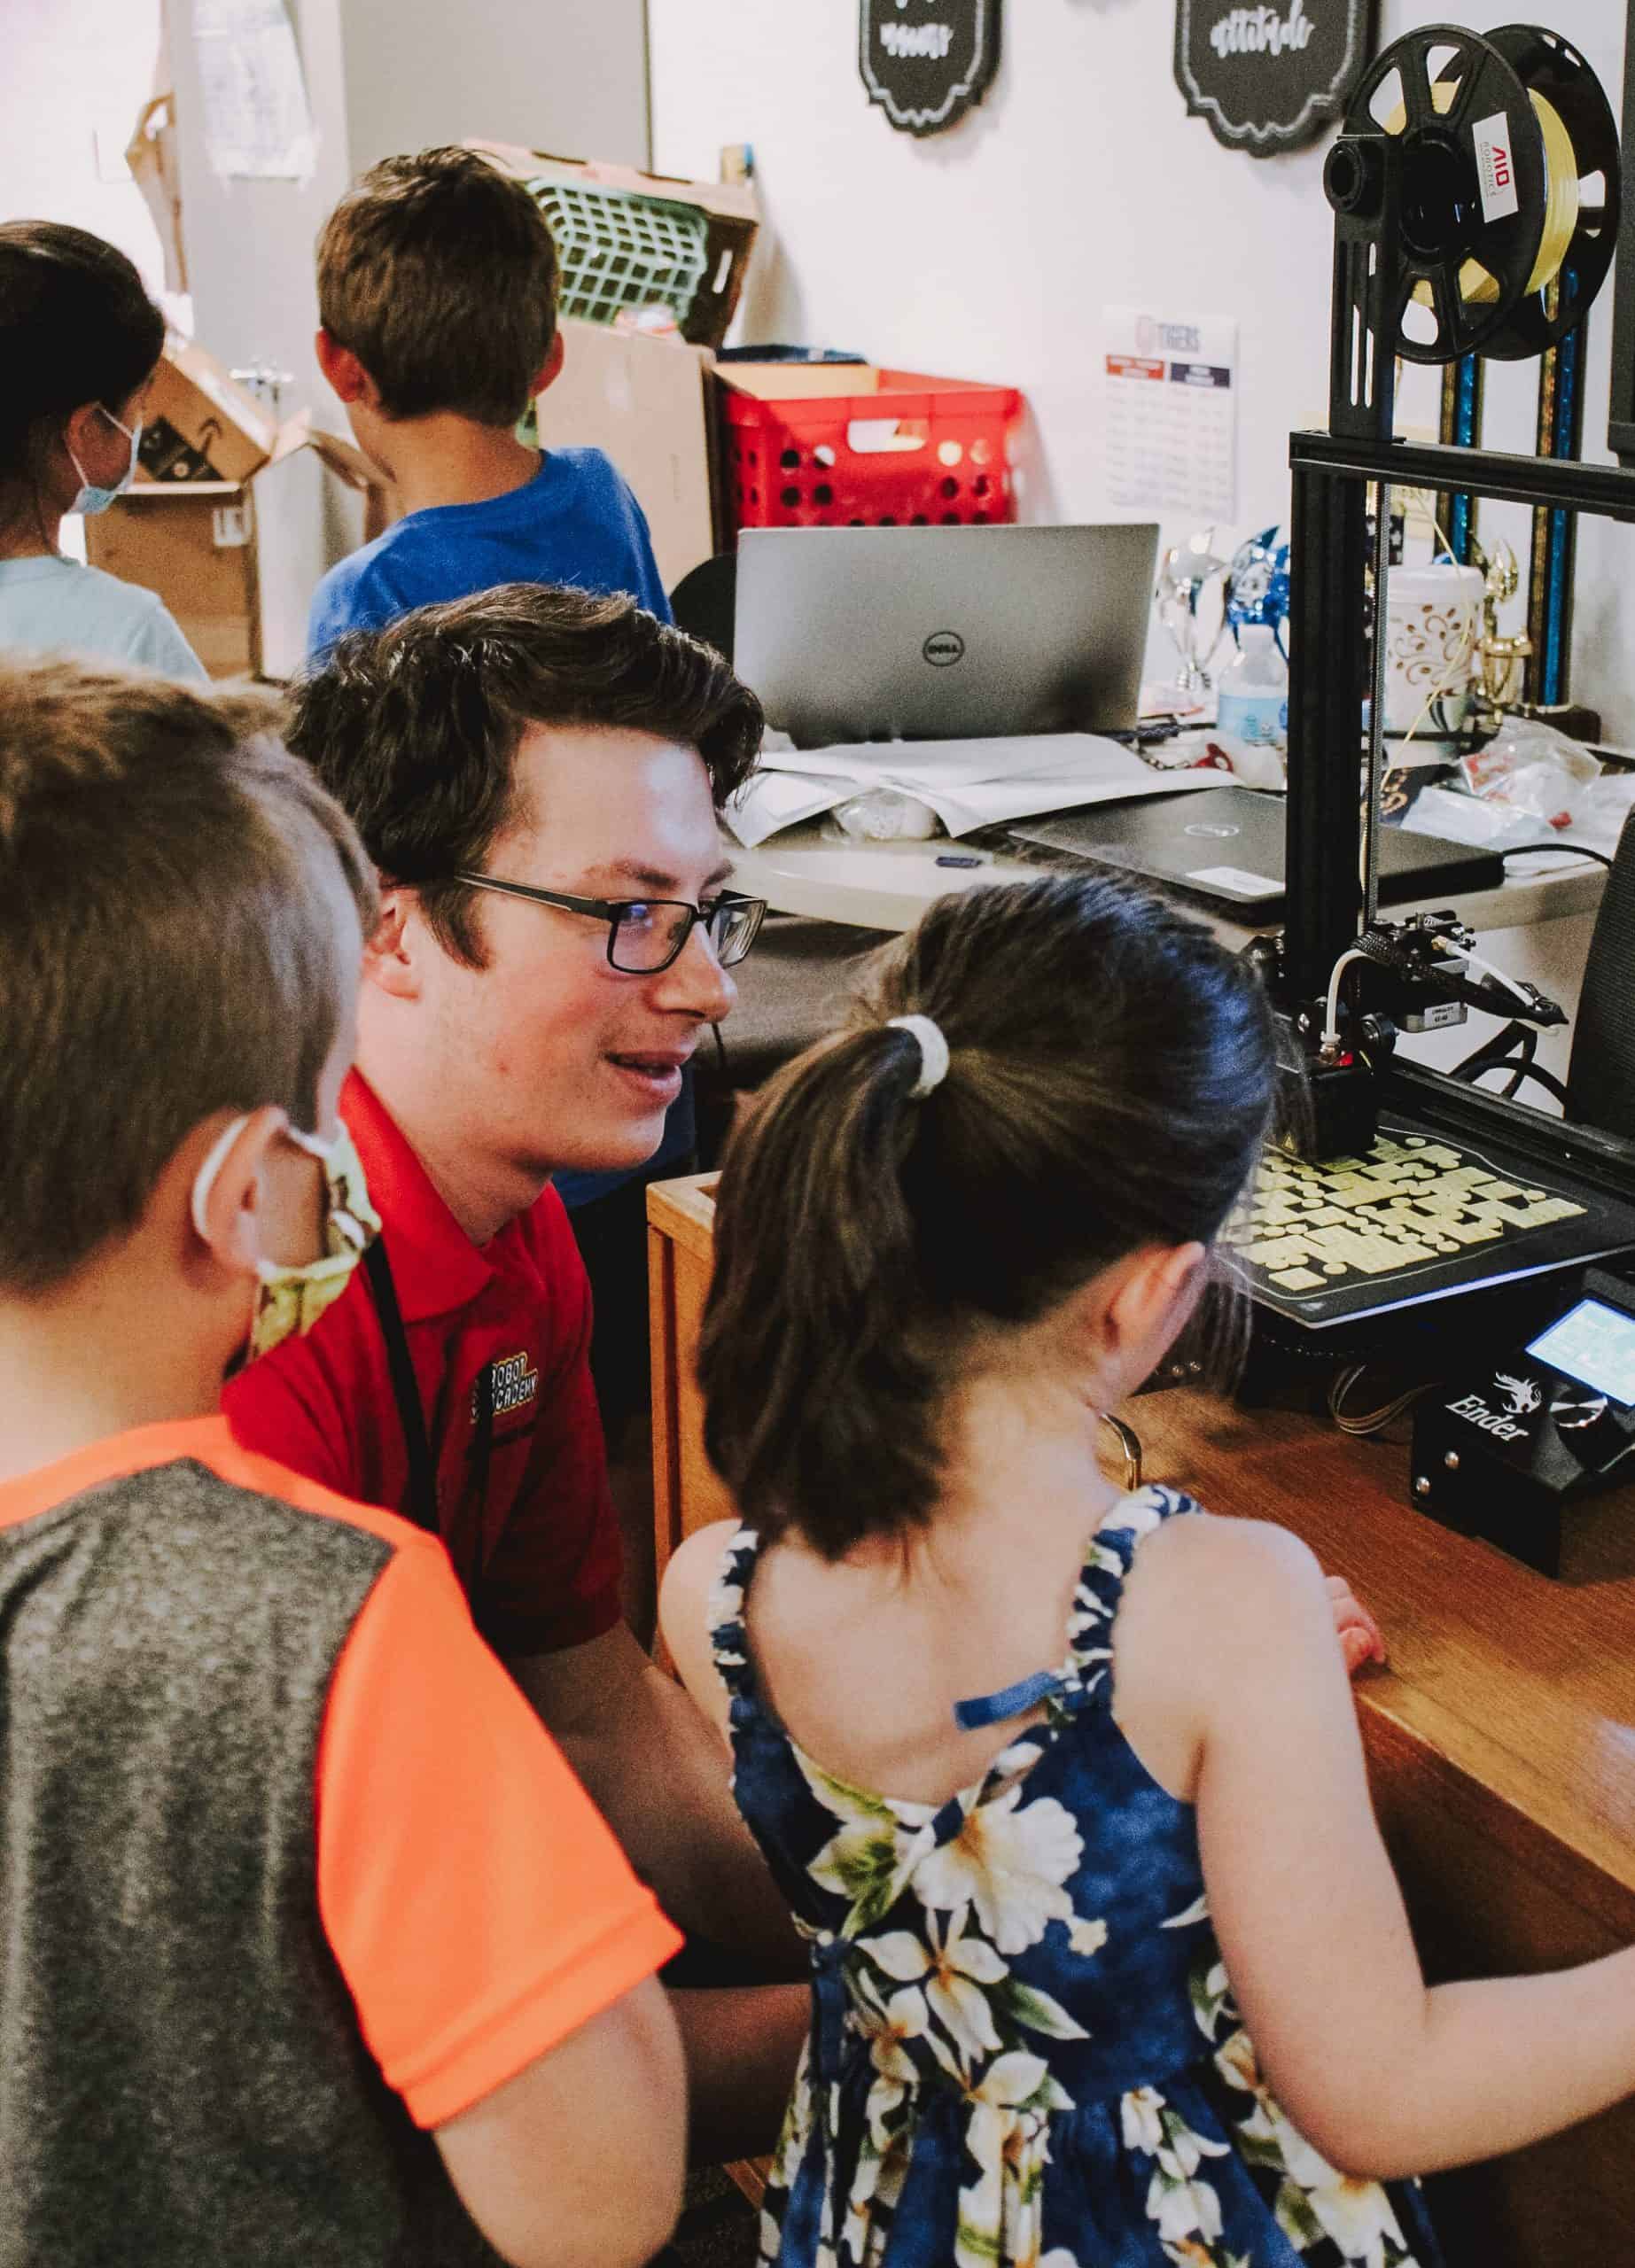 You are currently viewing Jr. LEGO® Robotics & 3D Printing Camp for ages 5 to 8 | Morning with Catered Snack | 4 Days:  July 18-21, 2023  |  9 am to 12:30 pm  | Westerville